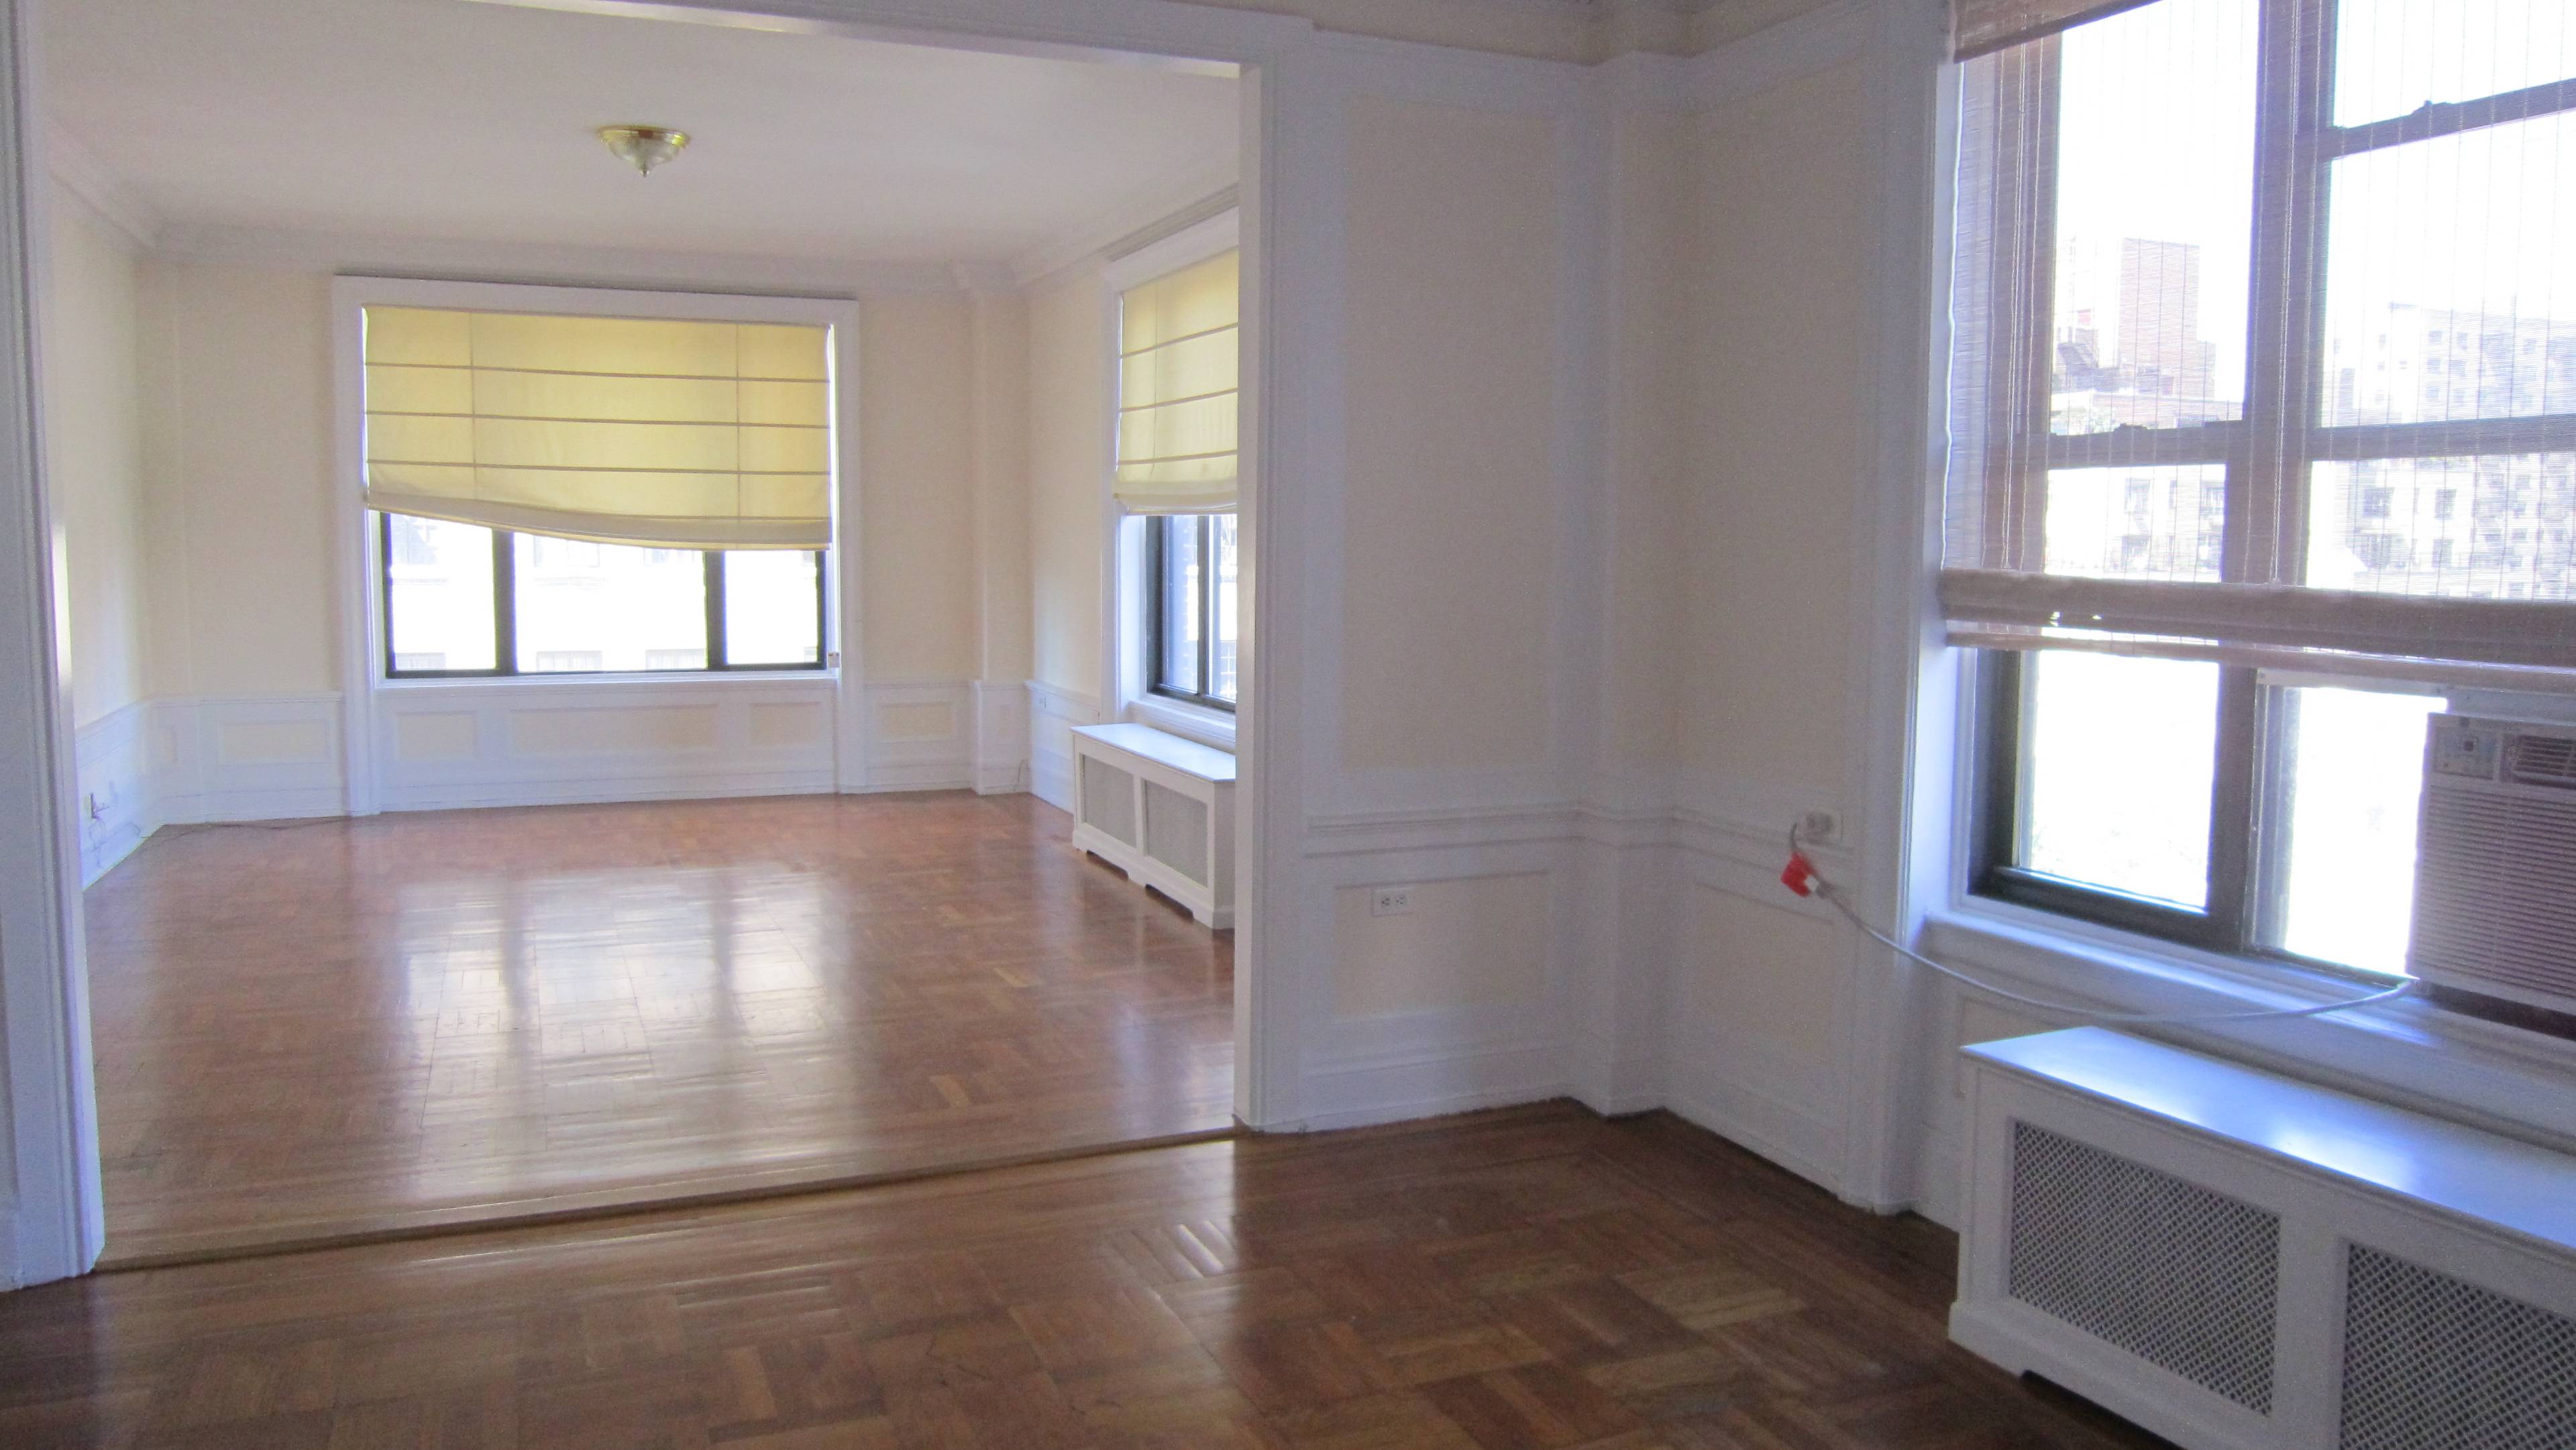 4BR 3 BA Bright Residence Central Park Spacious Living Room W/D Ample Closets Upper West SIde Best location NO FEE